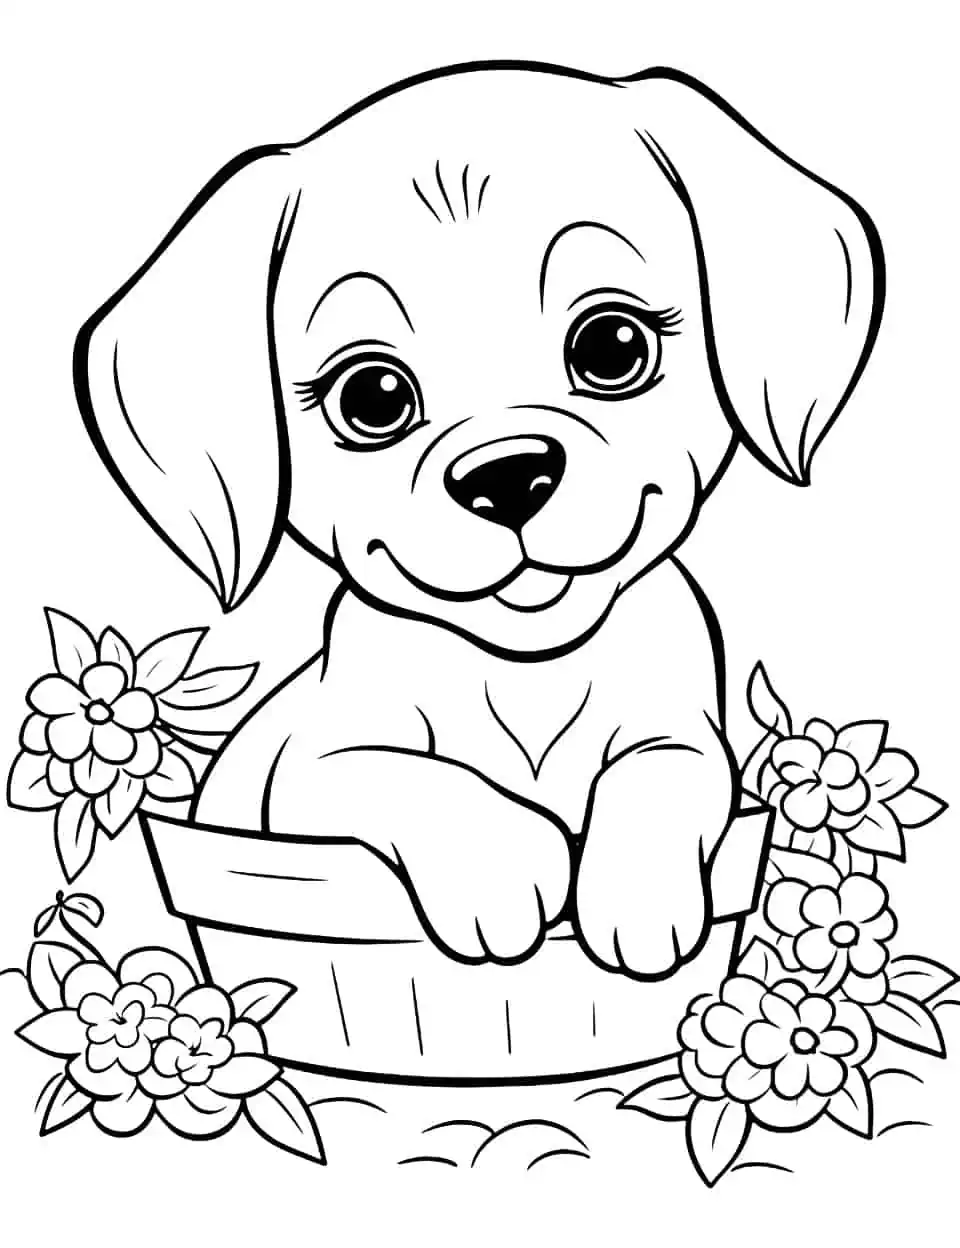 Cute Puppy in a Basket Dog Coloring Page - A tiny, cute puppy sitting inside a basket, surrounded by flowers.